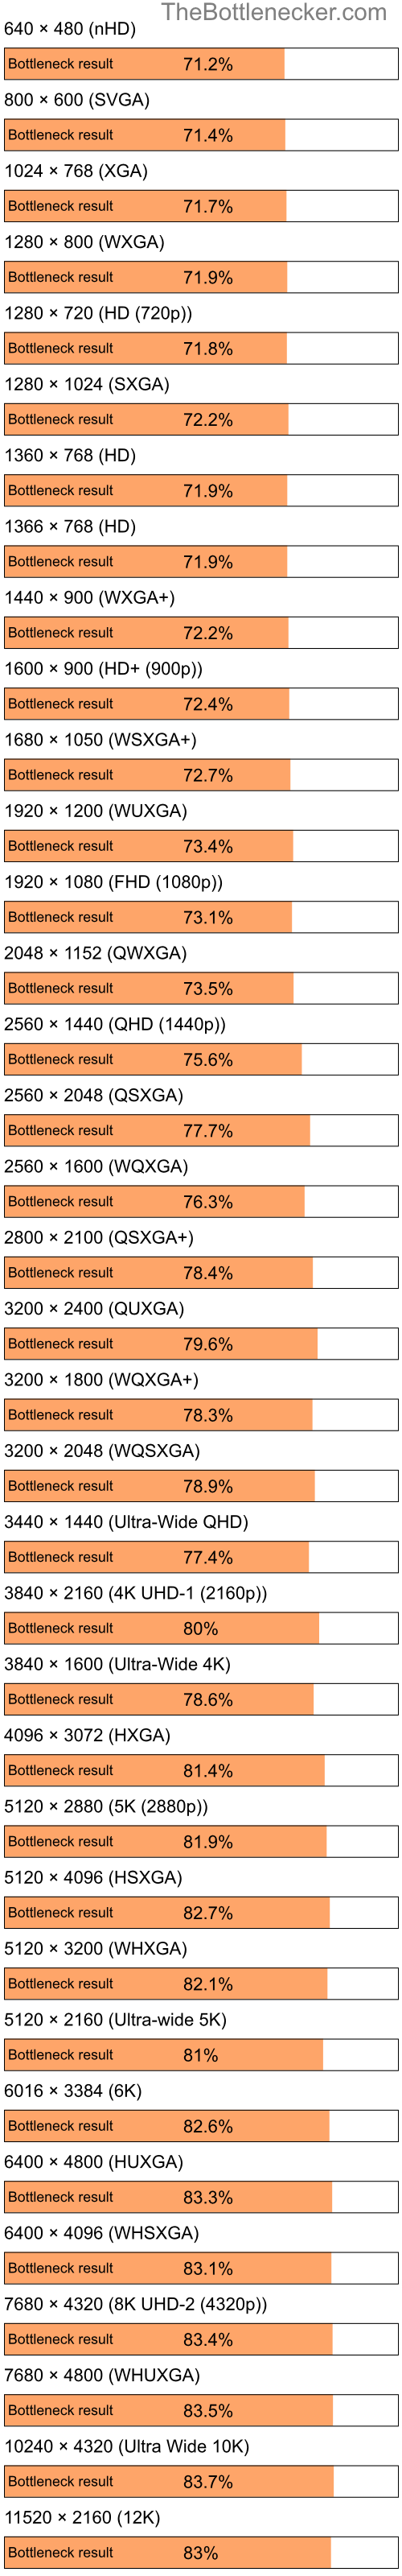 Bottleneck results by resolution for Intel Celeron M 420 and NVIDIA Quadro NVS 295 in Graphic Card Intense Tasks